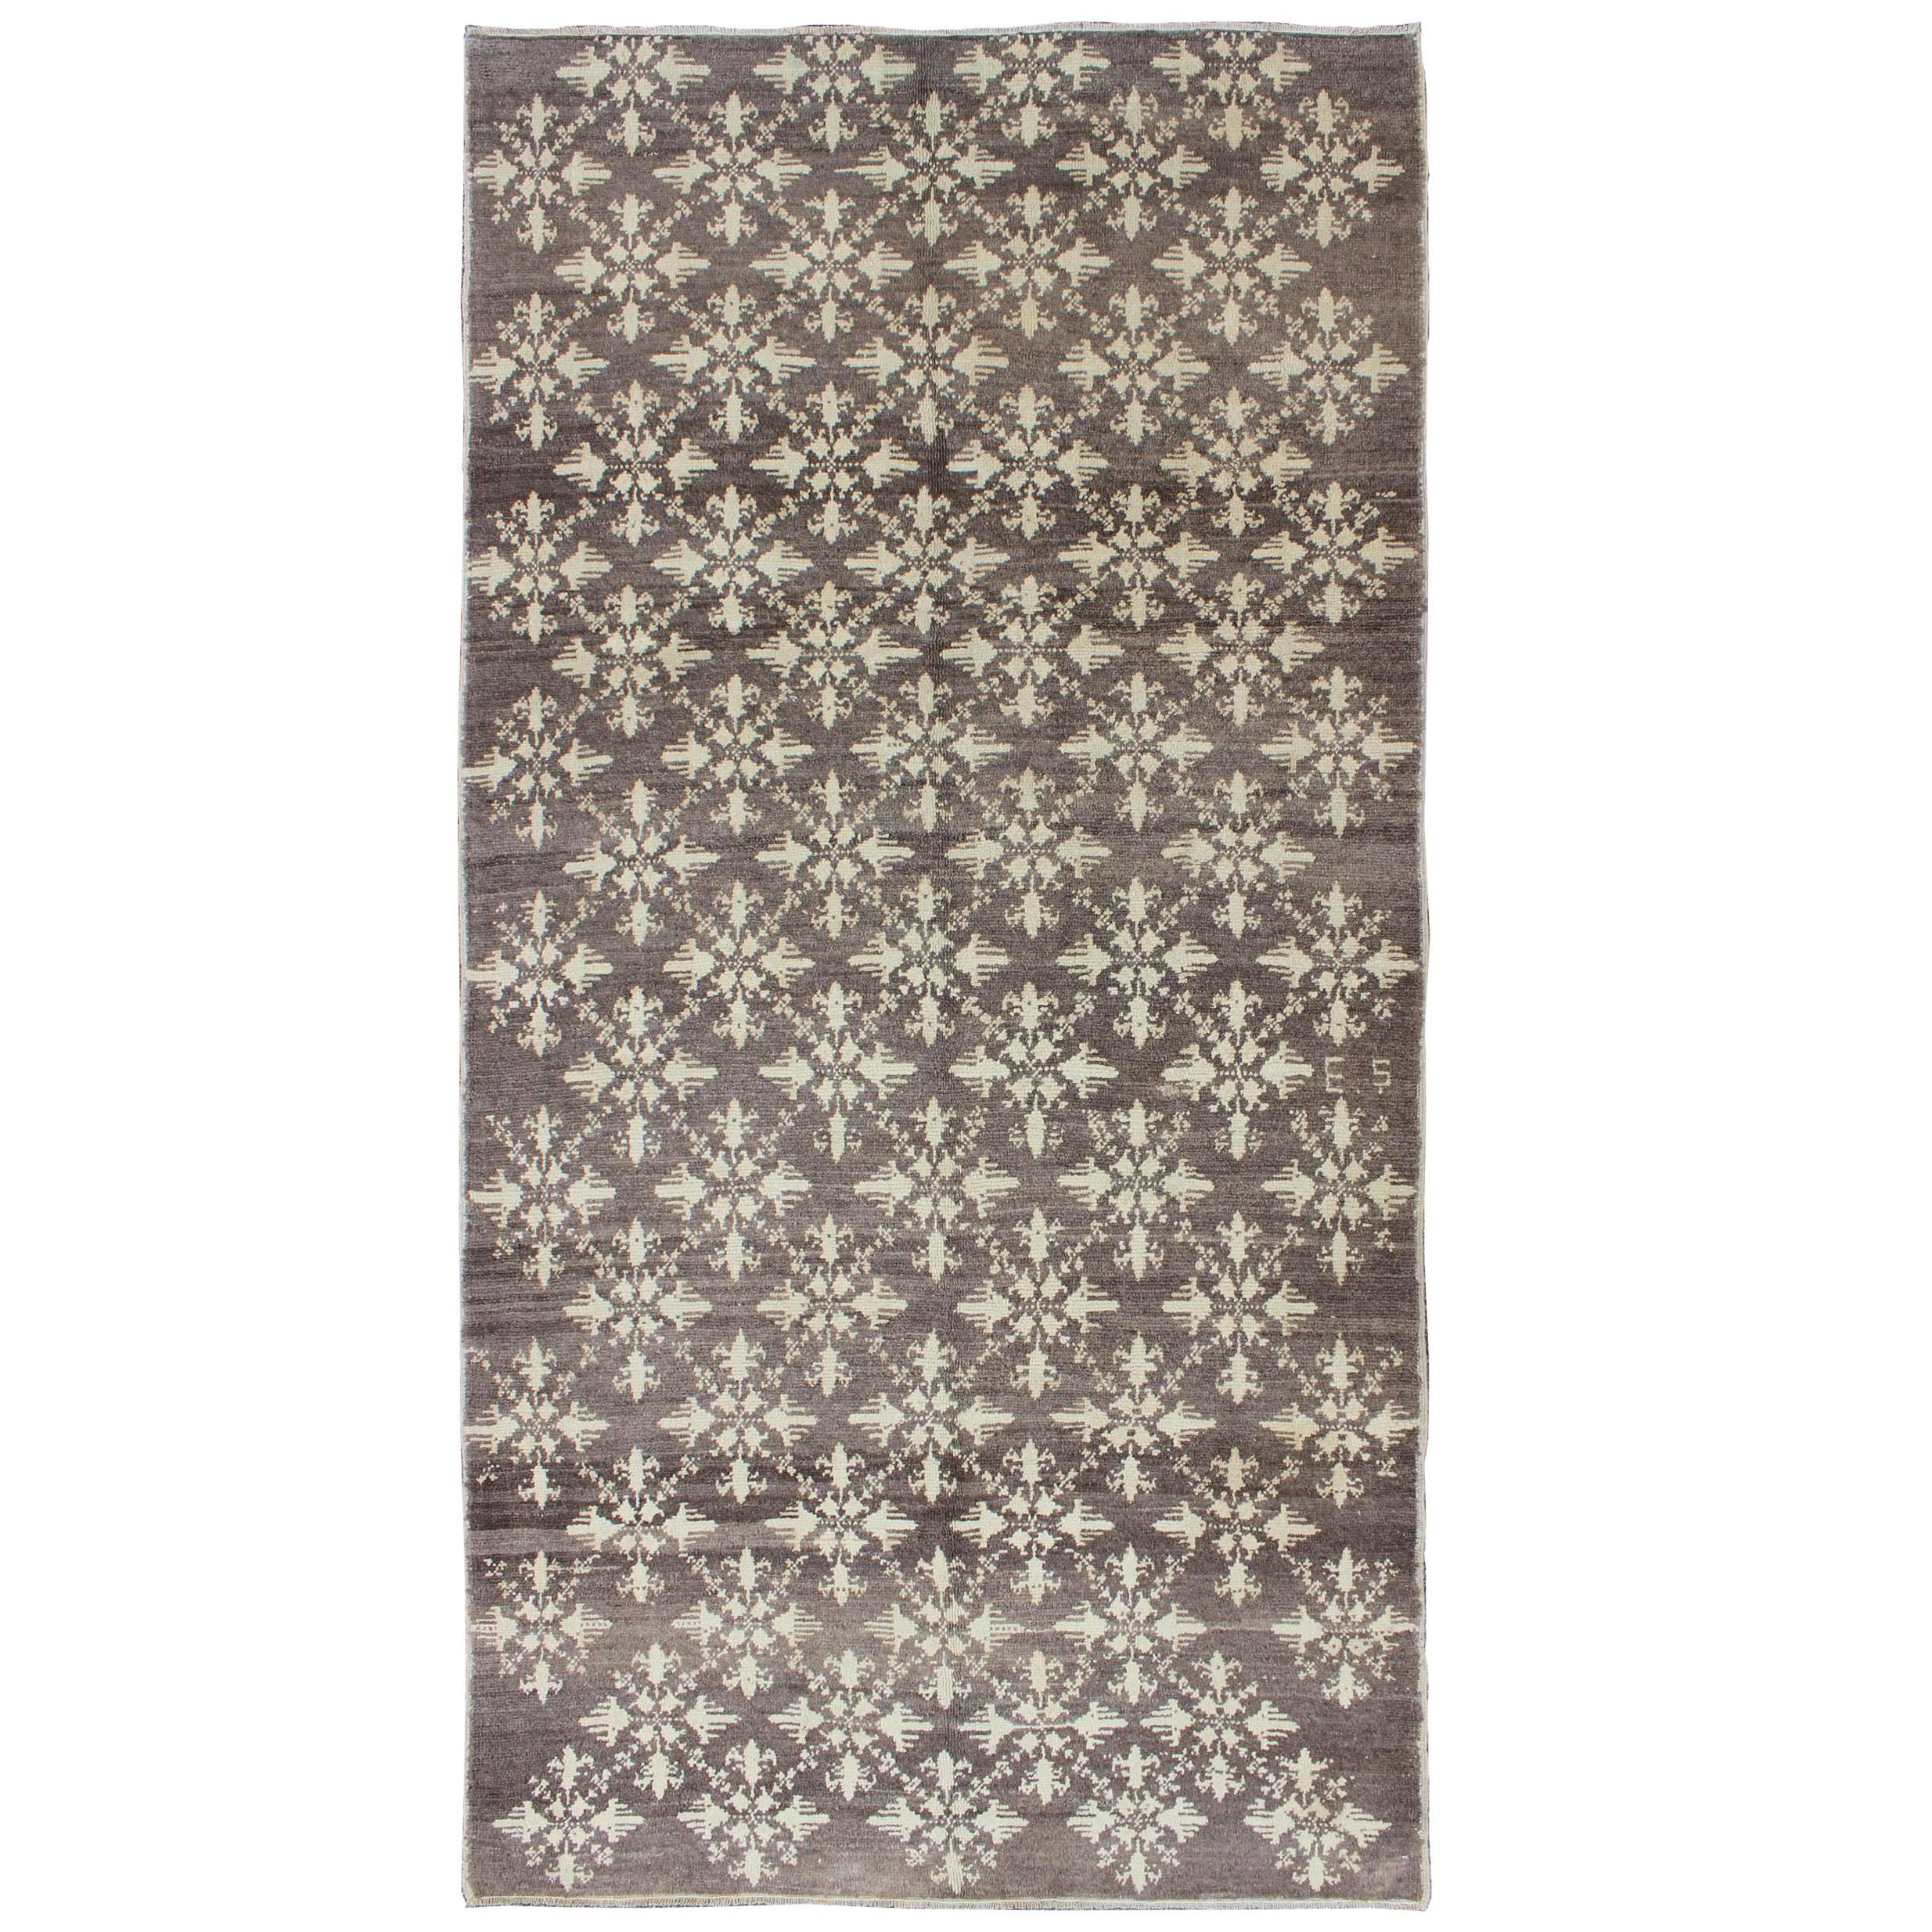 Charcoal Background Vintage Turkish Oushak-Tulu Rug with Ivory Flower Blossoms